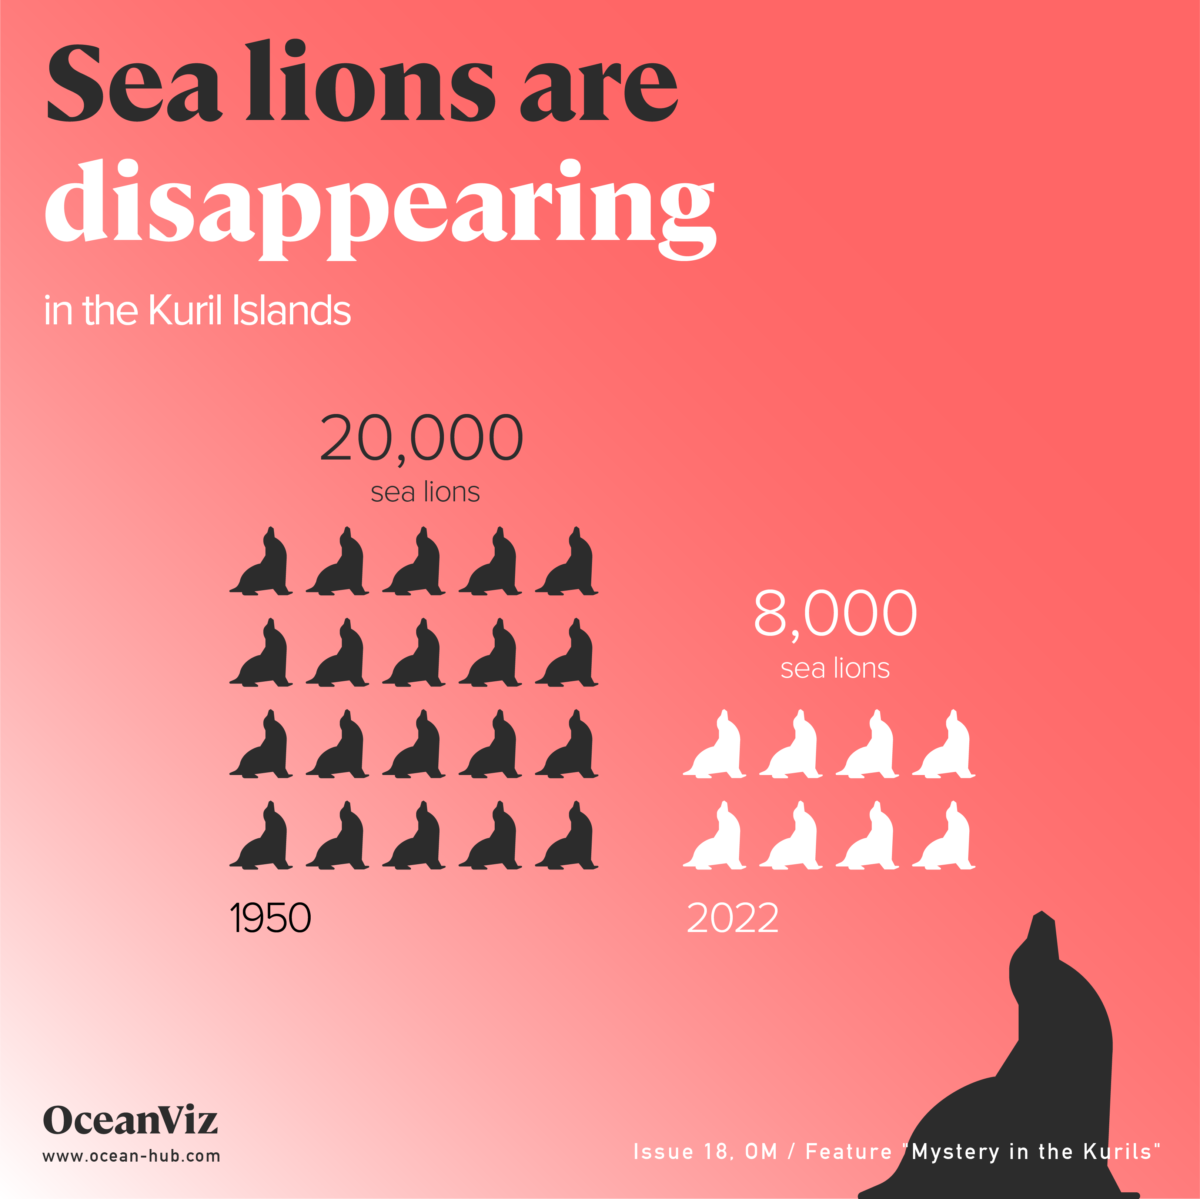 Sea lion are disappearing